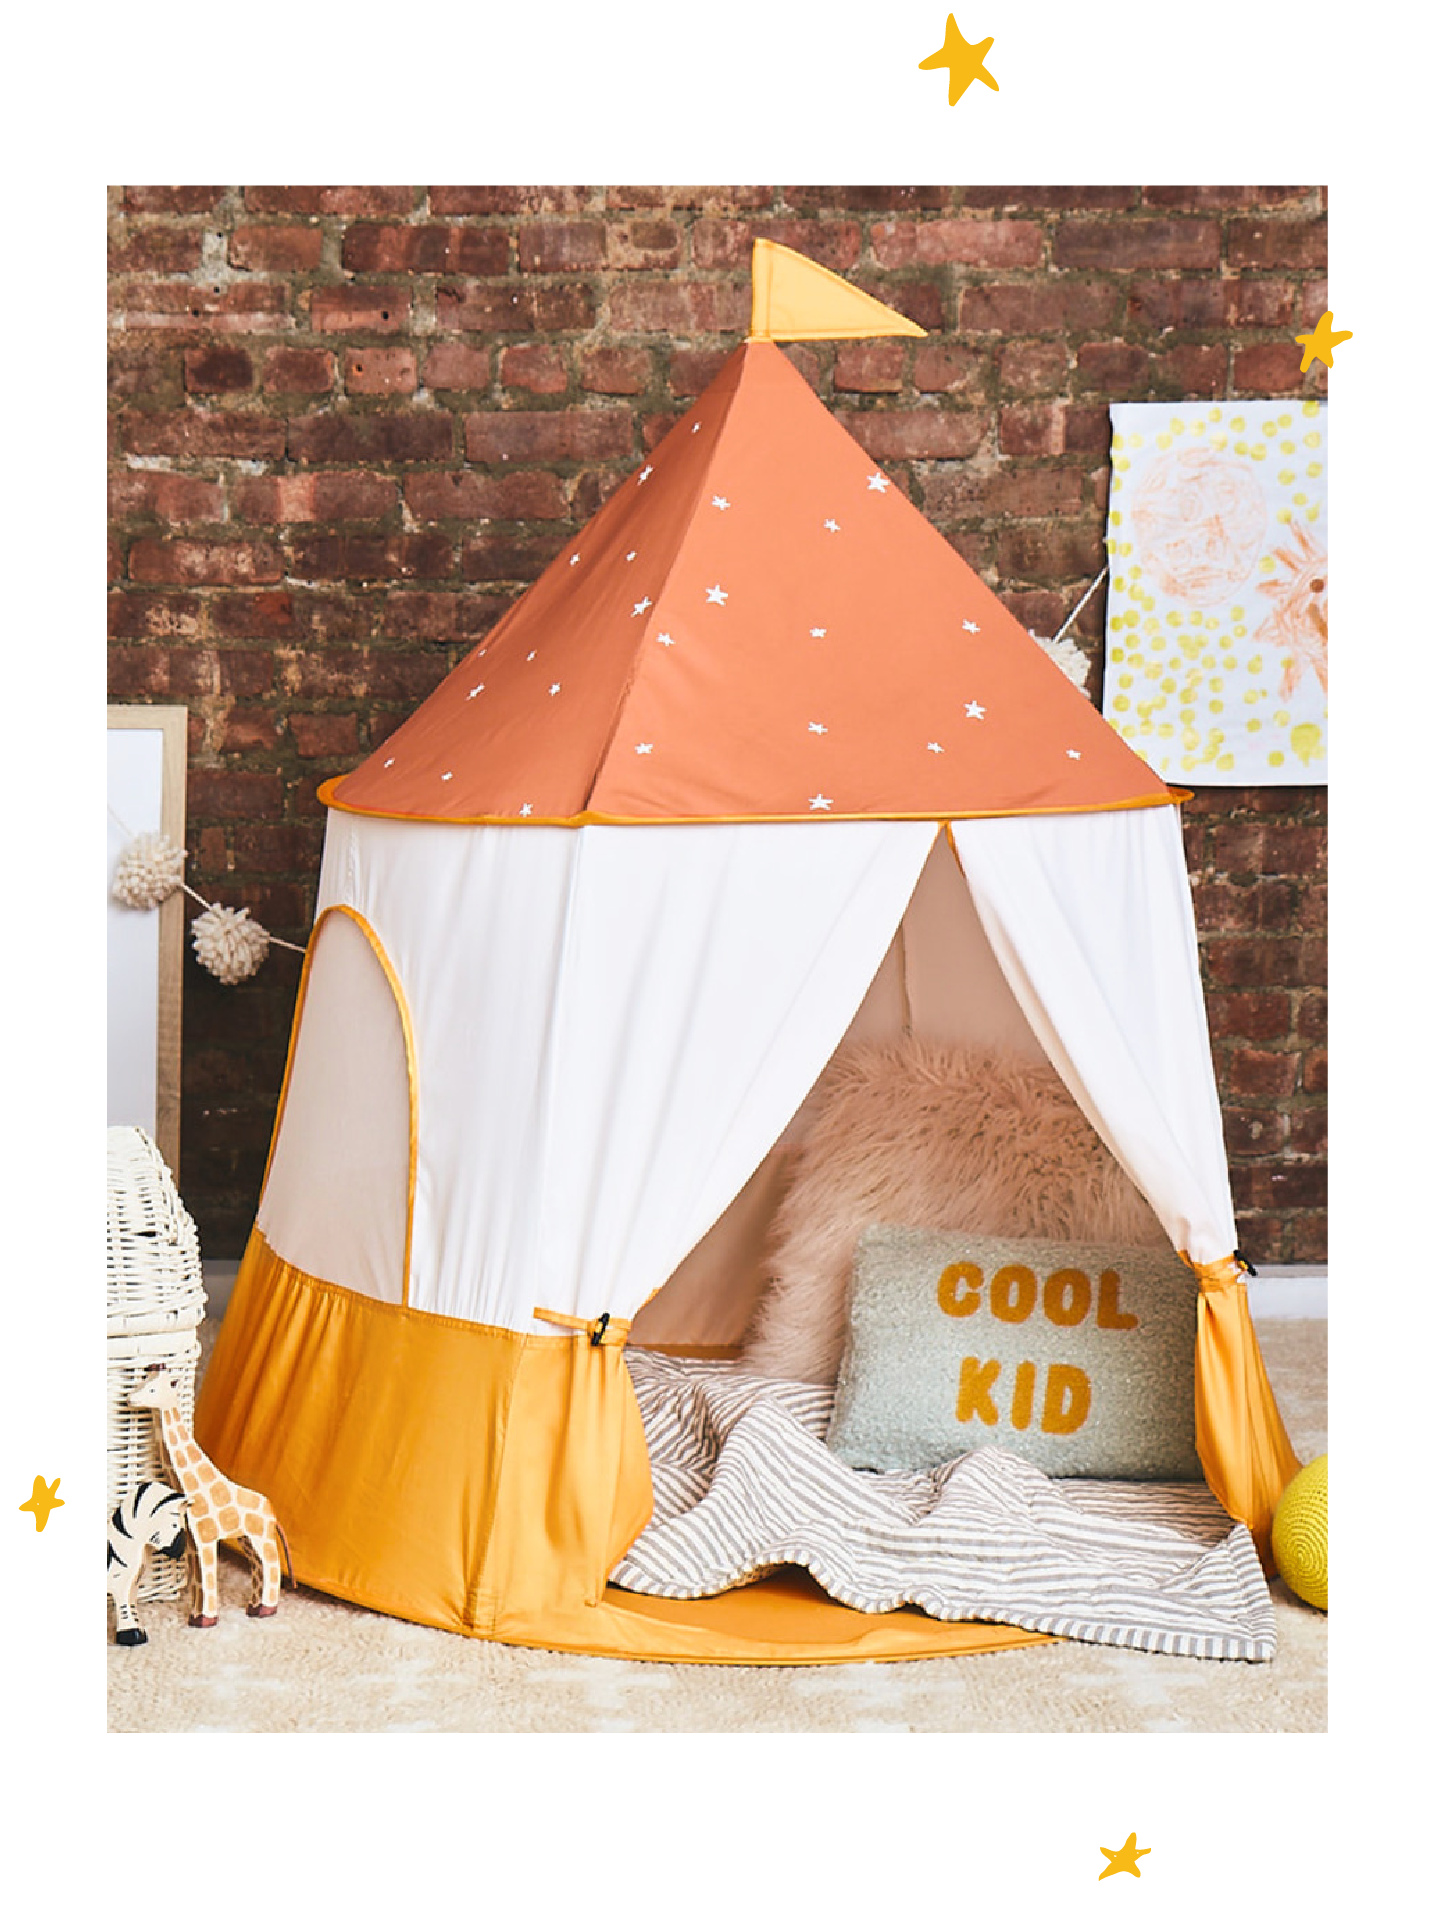 Chelsea & West retro play tent with yellow and white contrast, brown top with stars, yellow flag